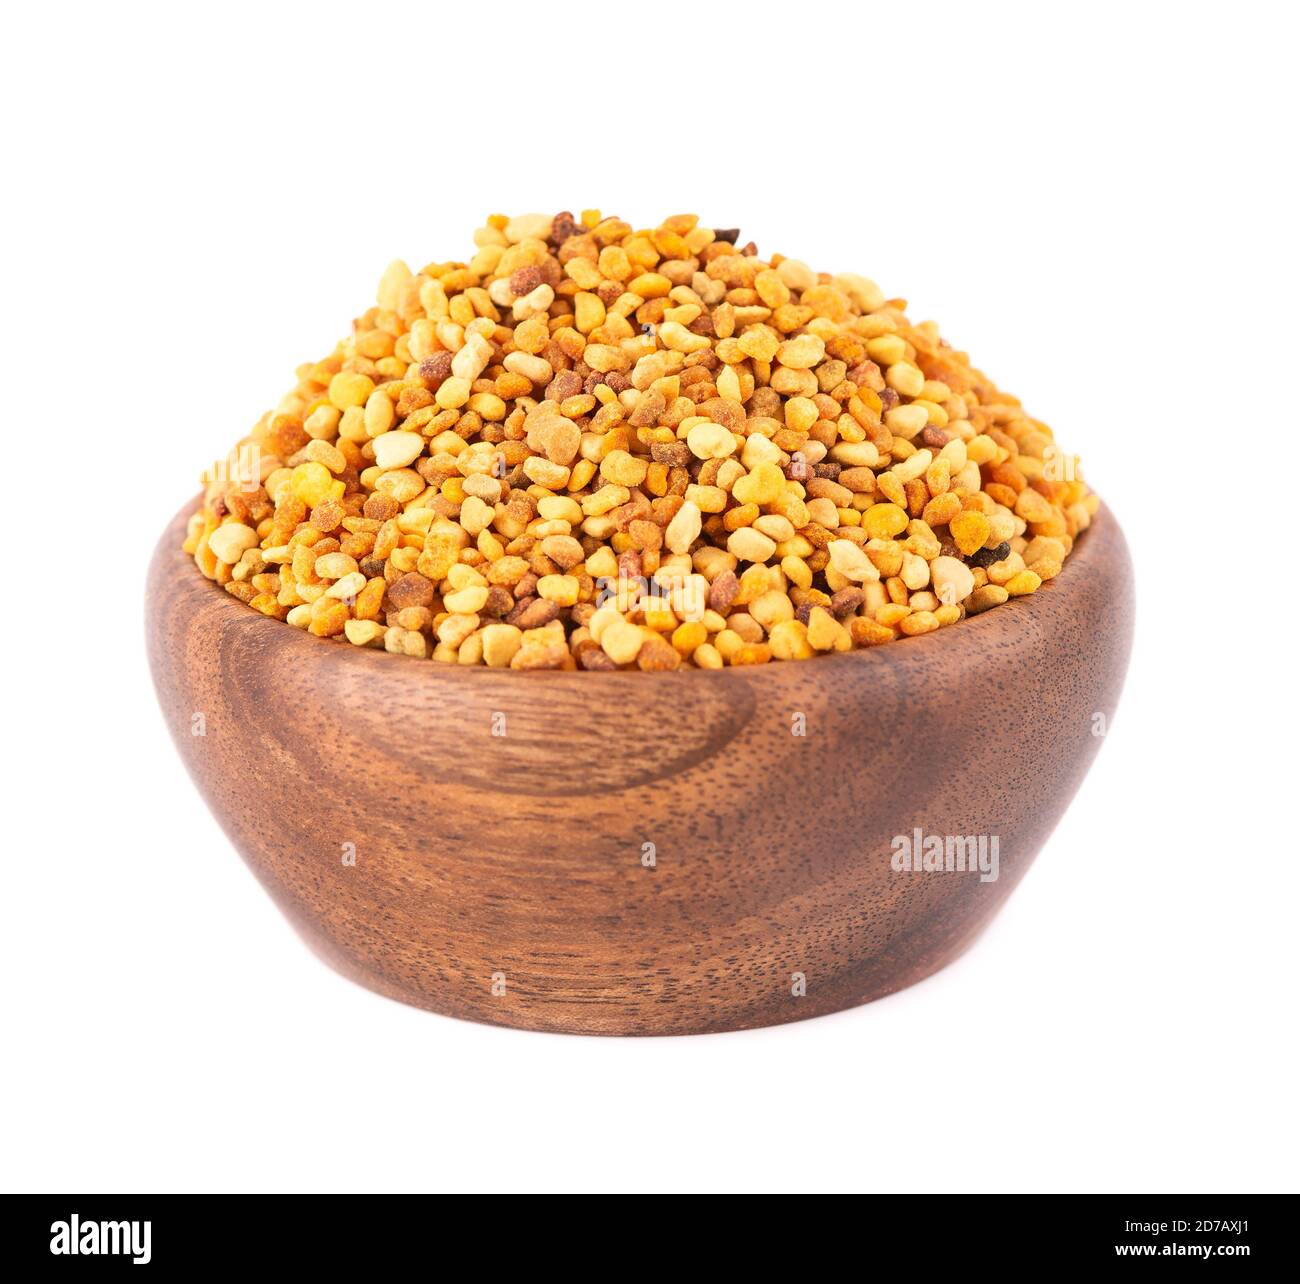 Flower pollen grains in wooden bowl, isolated on white background. Pile of bee pollen or perga. Stock Photo